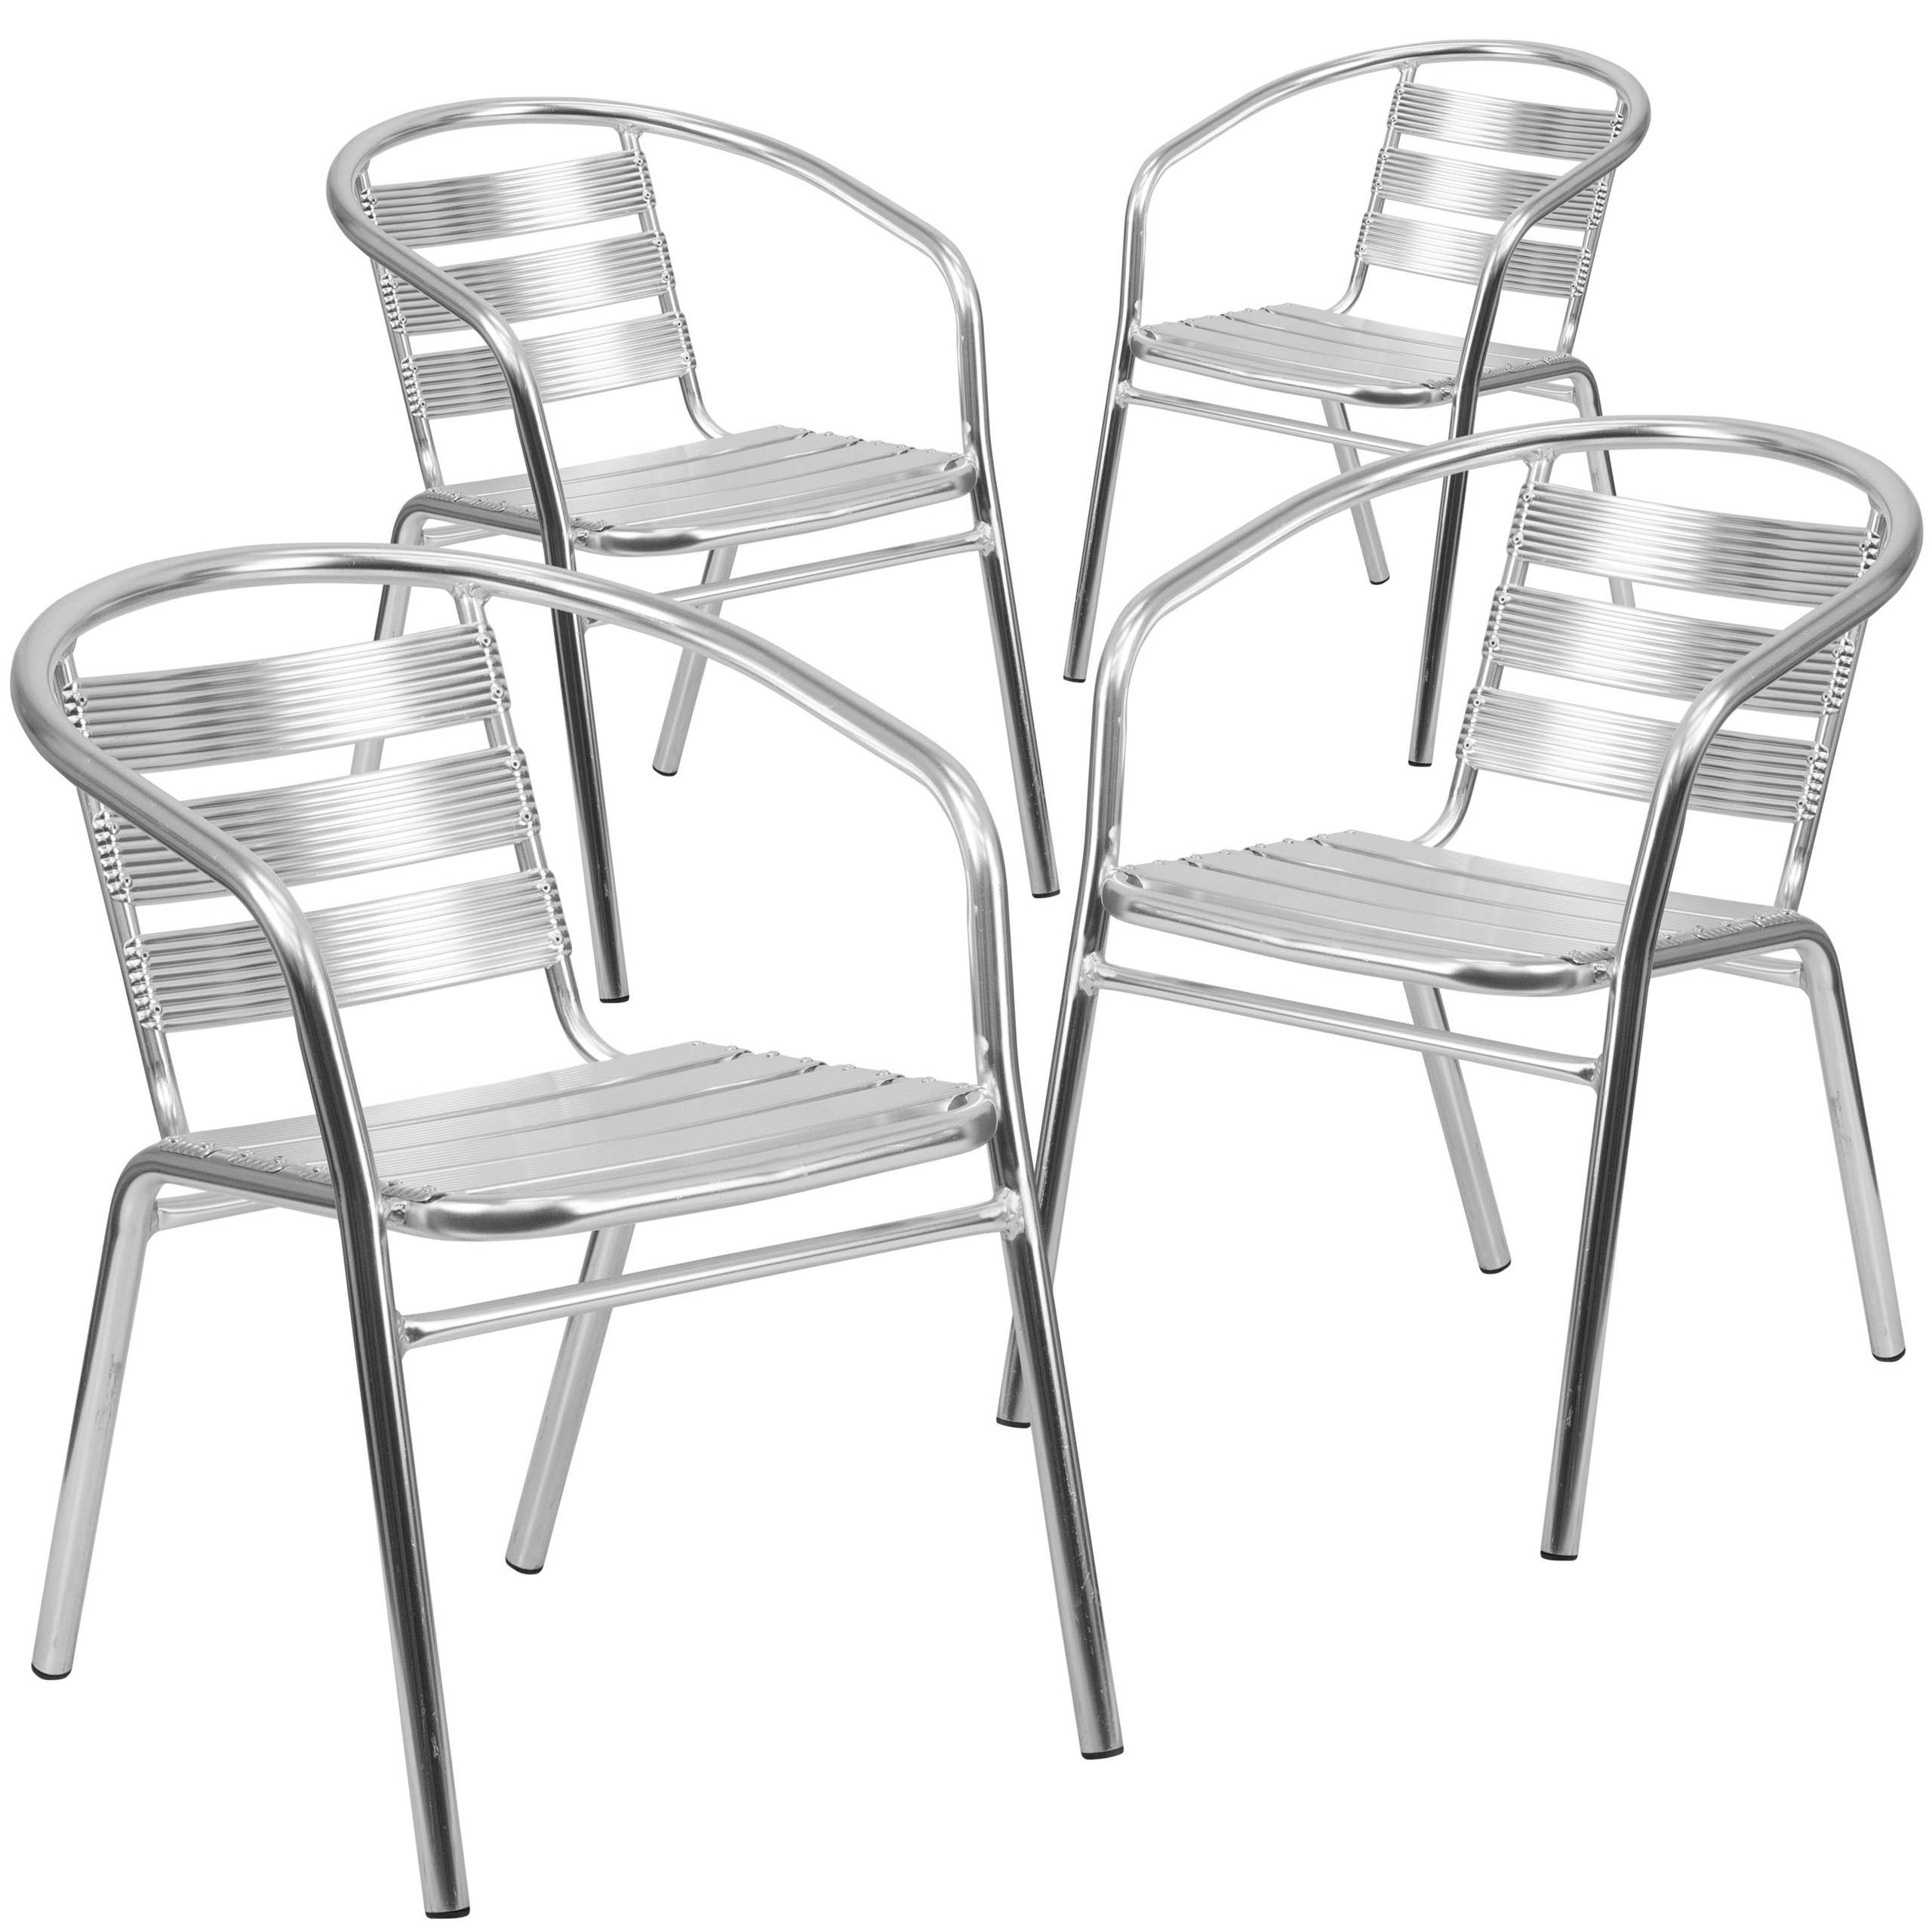 Aluminum Patio Chairs Visualhunt, Heavy Duty Metal Outdoor Dining Chairs